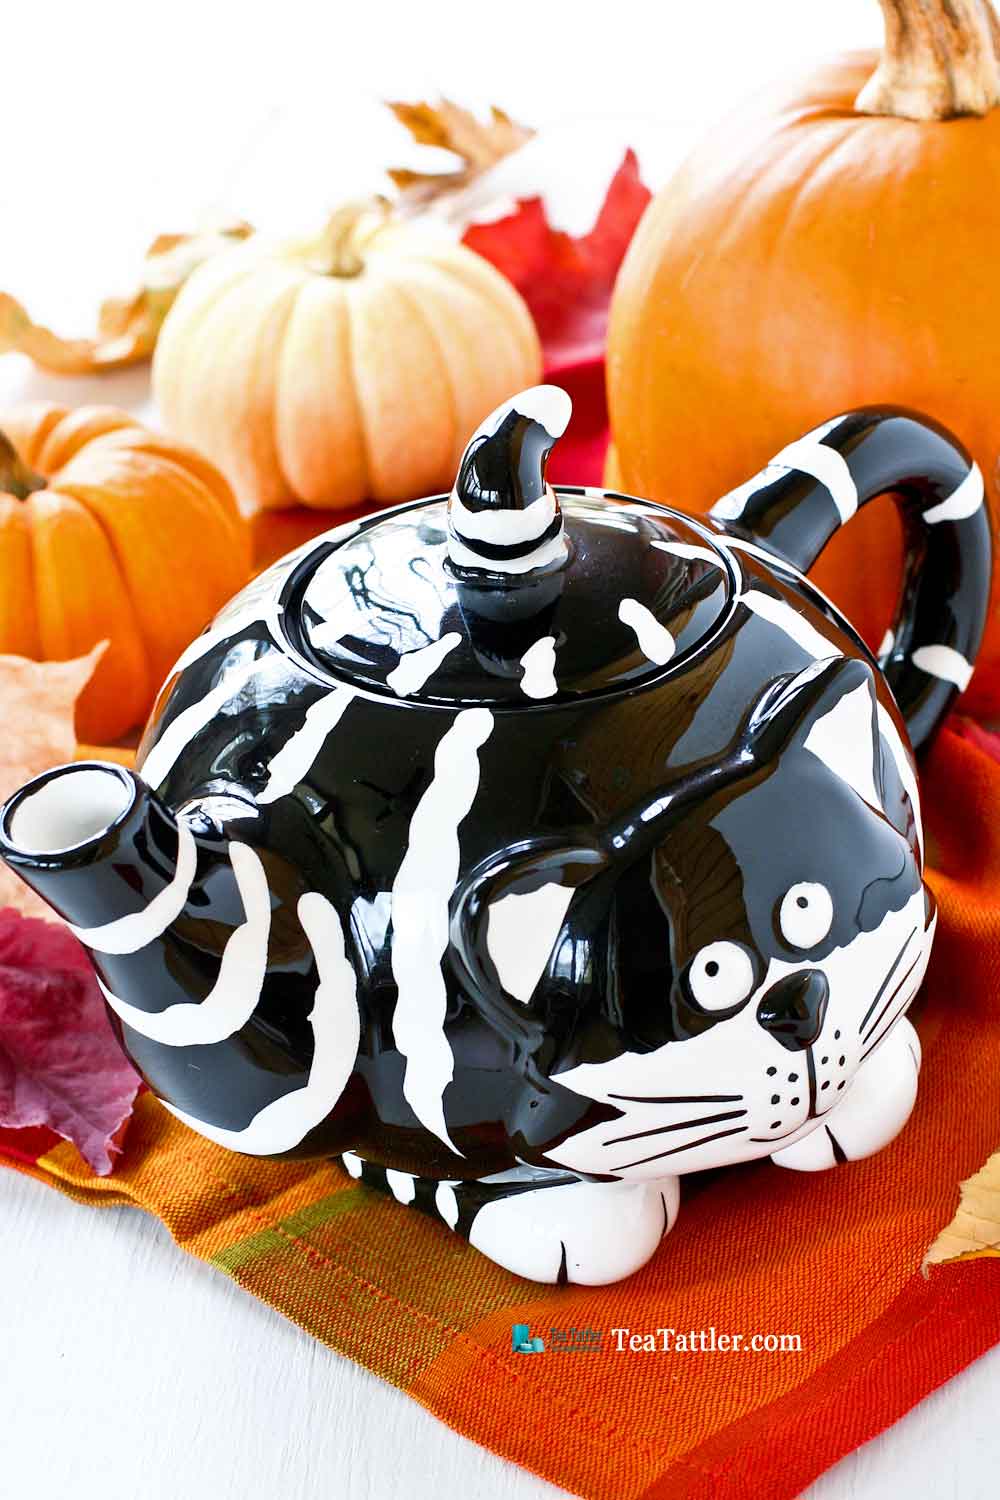 Adorable black and white striped Kitty Teapot named Chester The Cat . The finial is its pointy tail. Perfect for a theme tea party. | TeaTattler.com #kittyteapot #chesterthecat